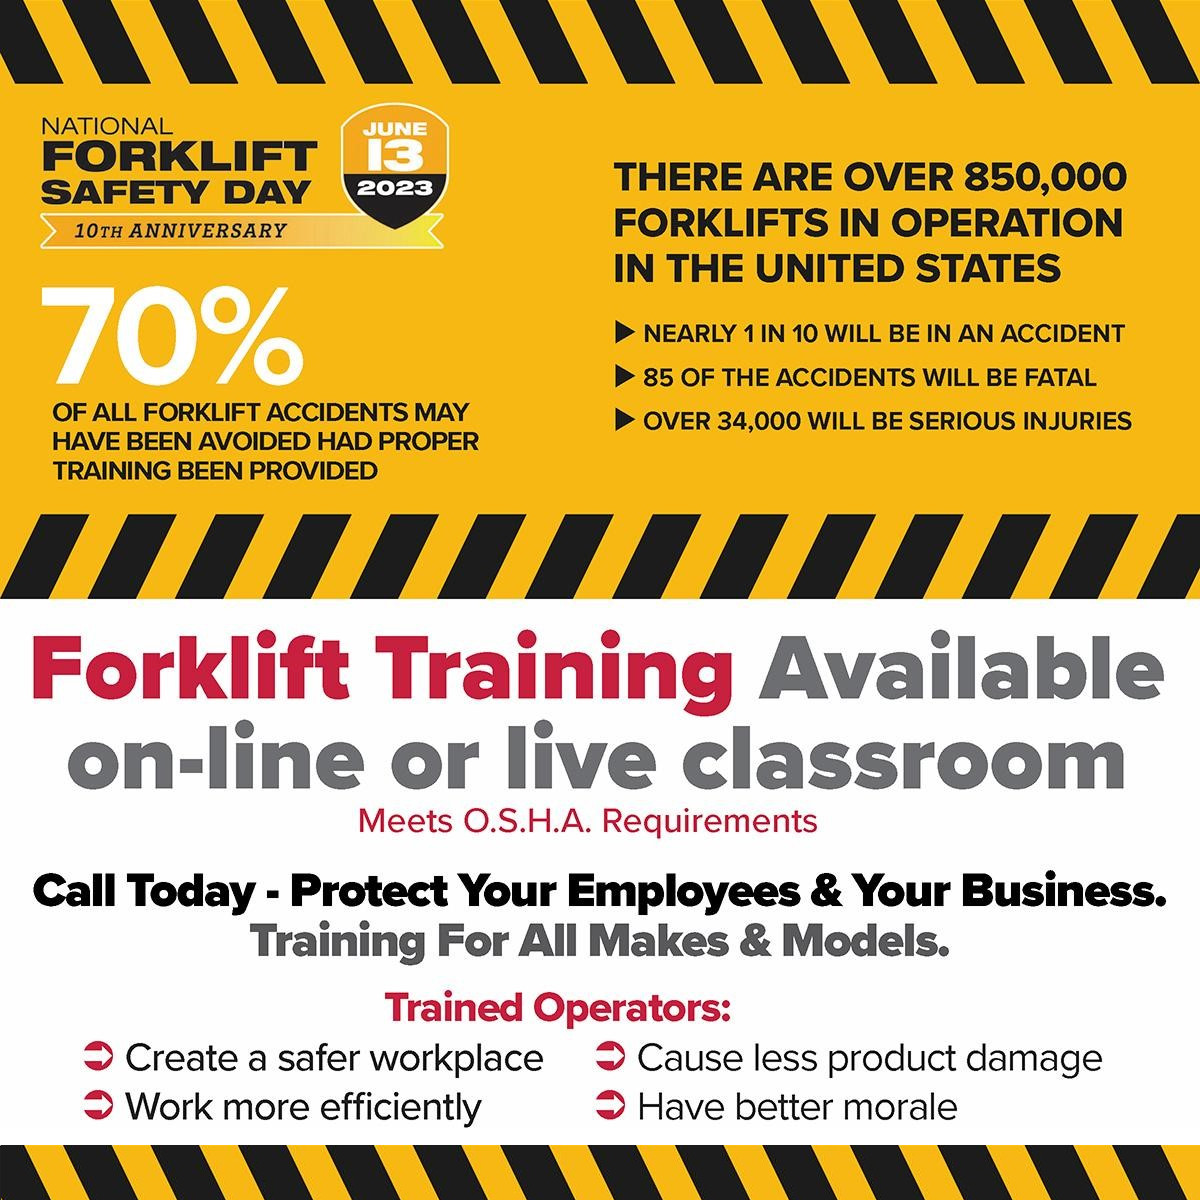 National Forklift Safety Day 10th Anniversary June 2023. Forklift Training Available On-line or live classroom Meets O.S.H.A. Requirements Call Today - Protect Your Employees & Your Business. Training For All Makes & Models. Trained Operators: - Create a safer workplace O Cause less product damage - Work more efficiently - Have better morale. 